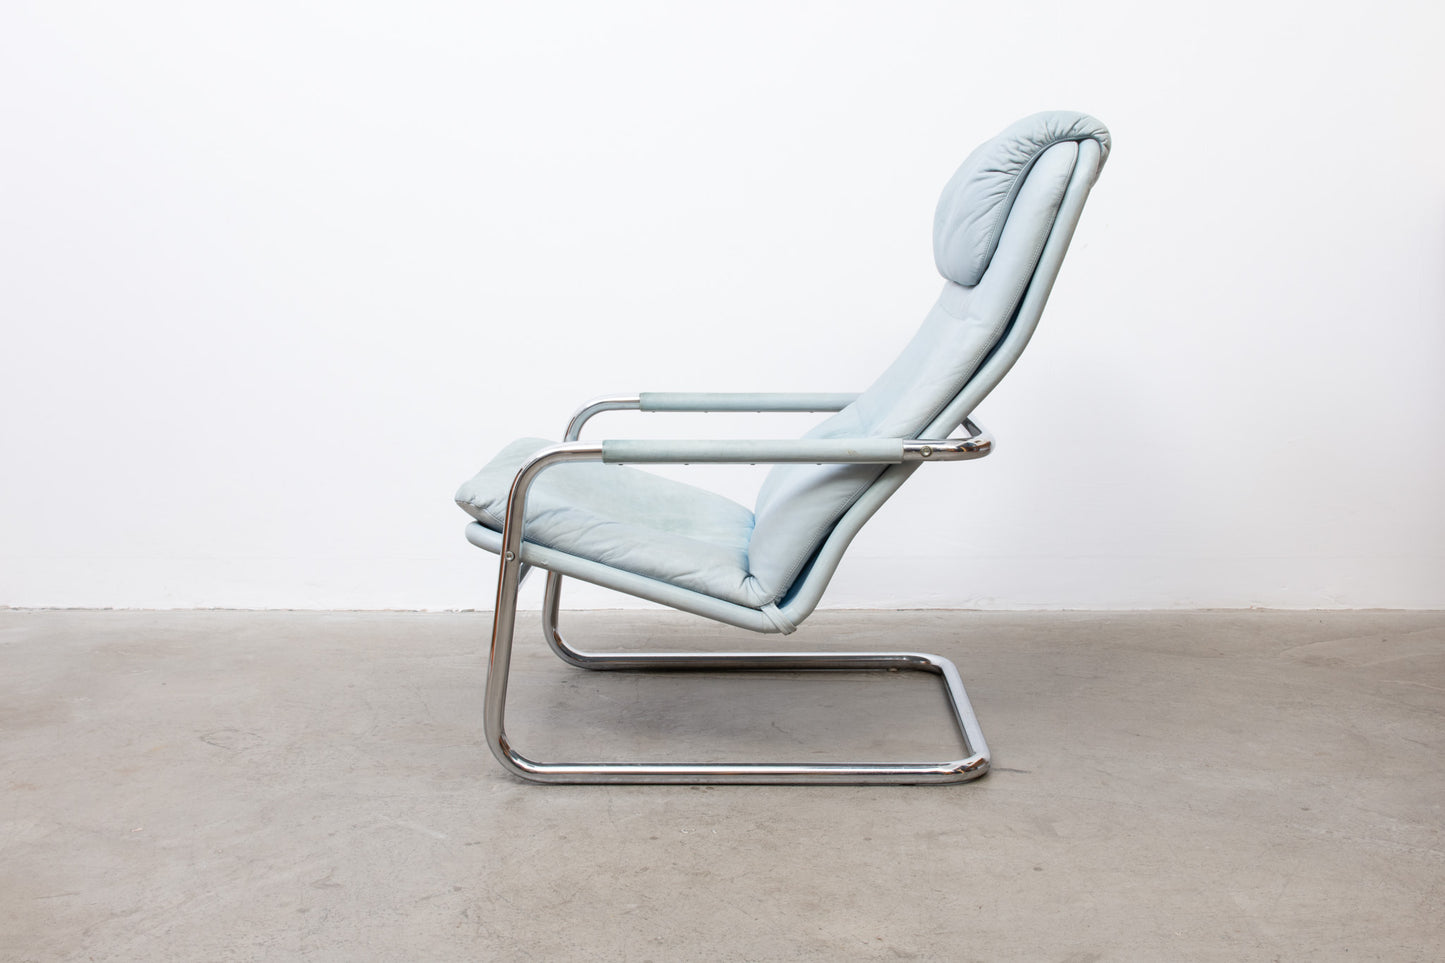 1980s lounger by Kenneth Bergenblad